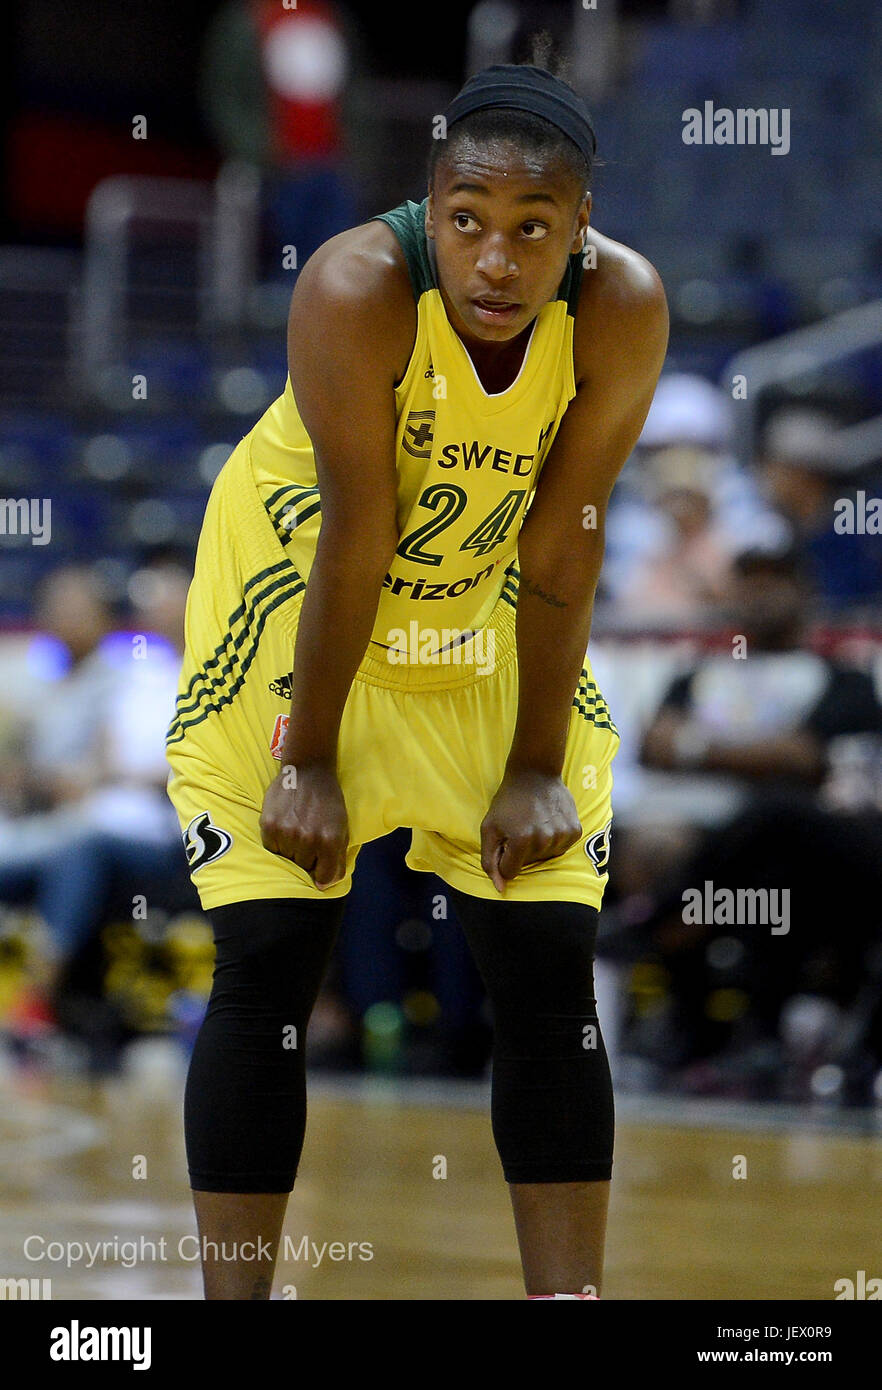 Washington, DC, USA. 27th June, 2017. 20170627 - Seattle Storm guard JEWELL LOYD (24) waits as a Washington Mystics player takes a free throw in the first half at the Verizon Center in Washington. Credit: Chuck Myers/ZUMA Wire/Alamy Live News Stock Photo